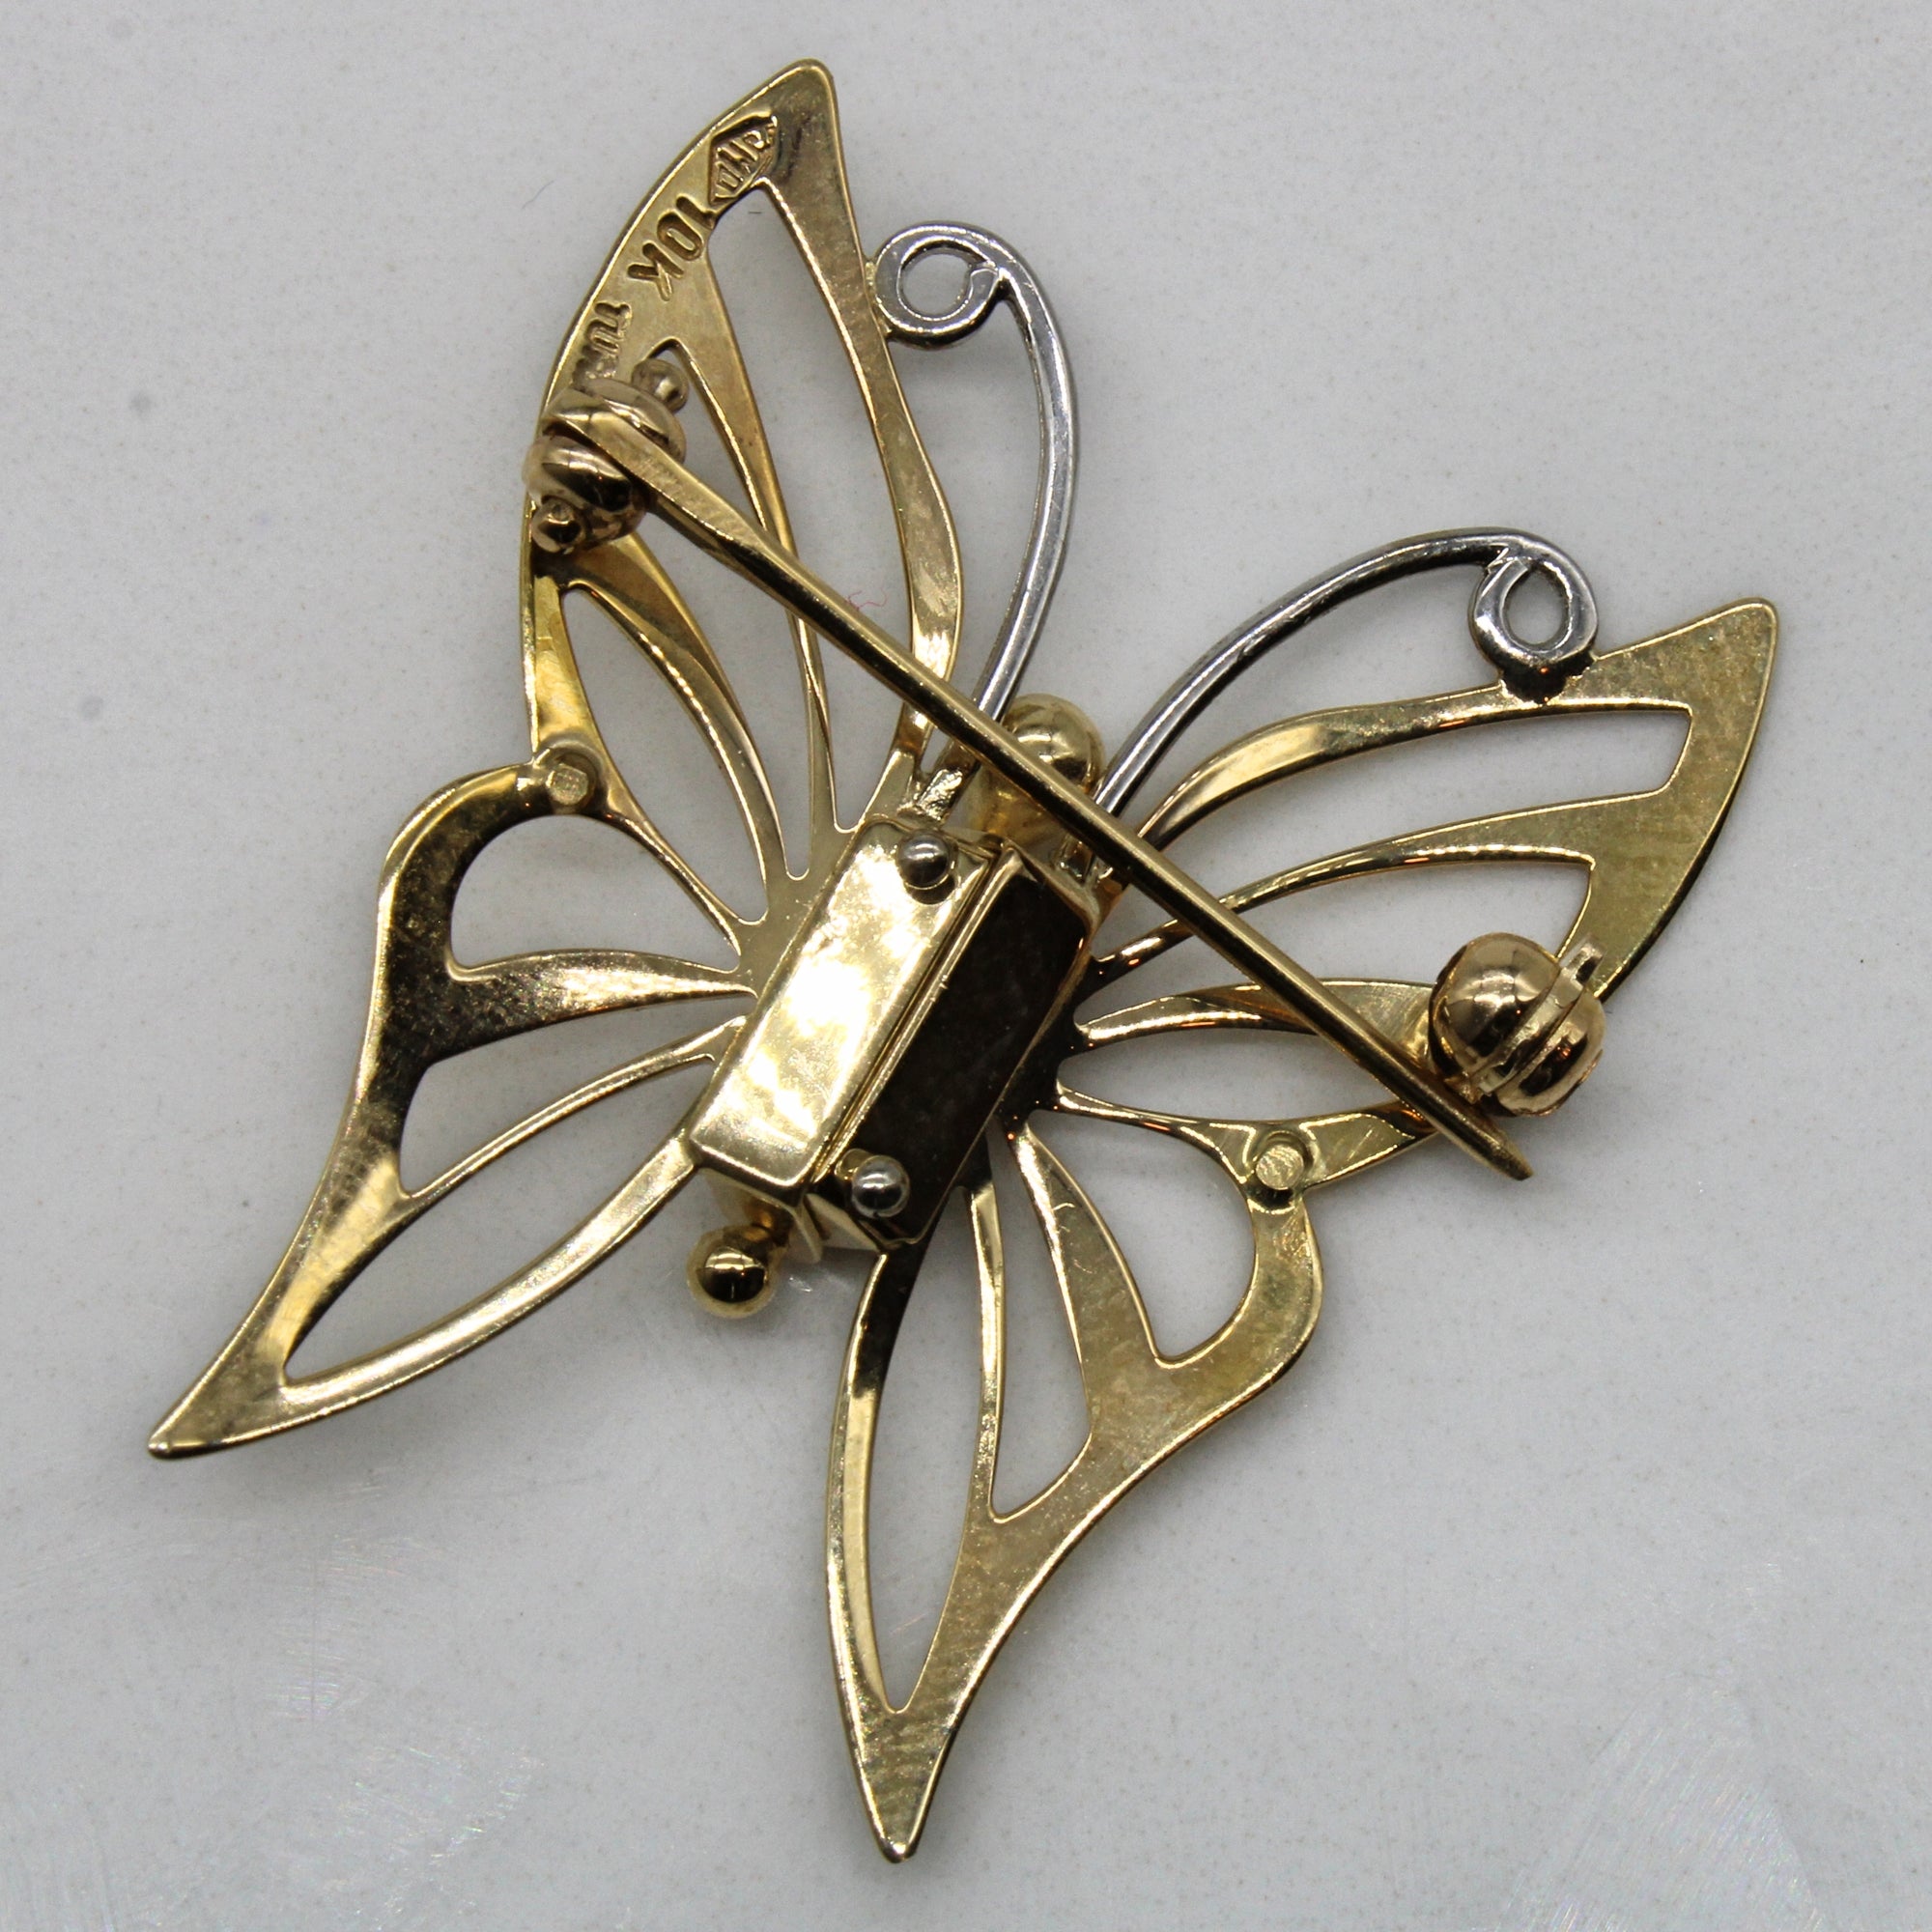 Duo Tone Gold Butterfly Brooch